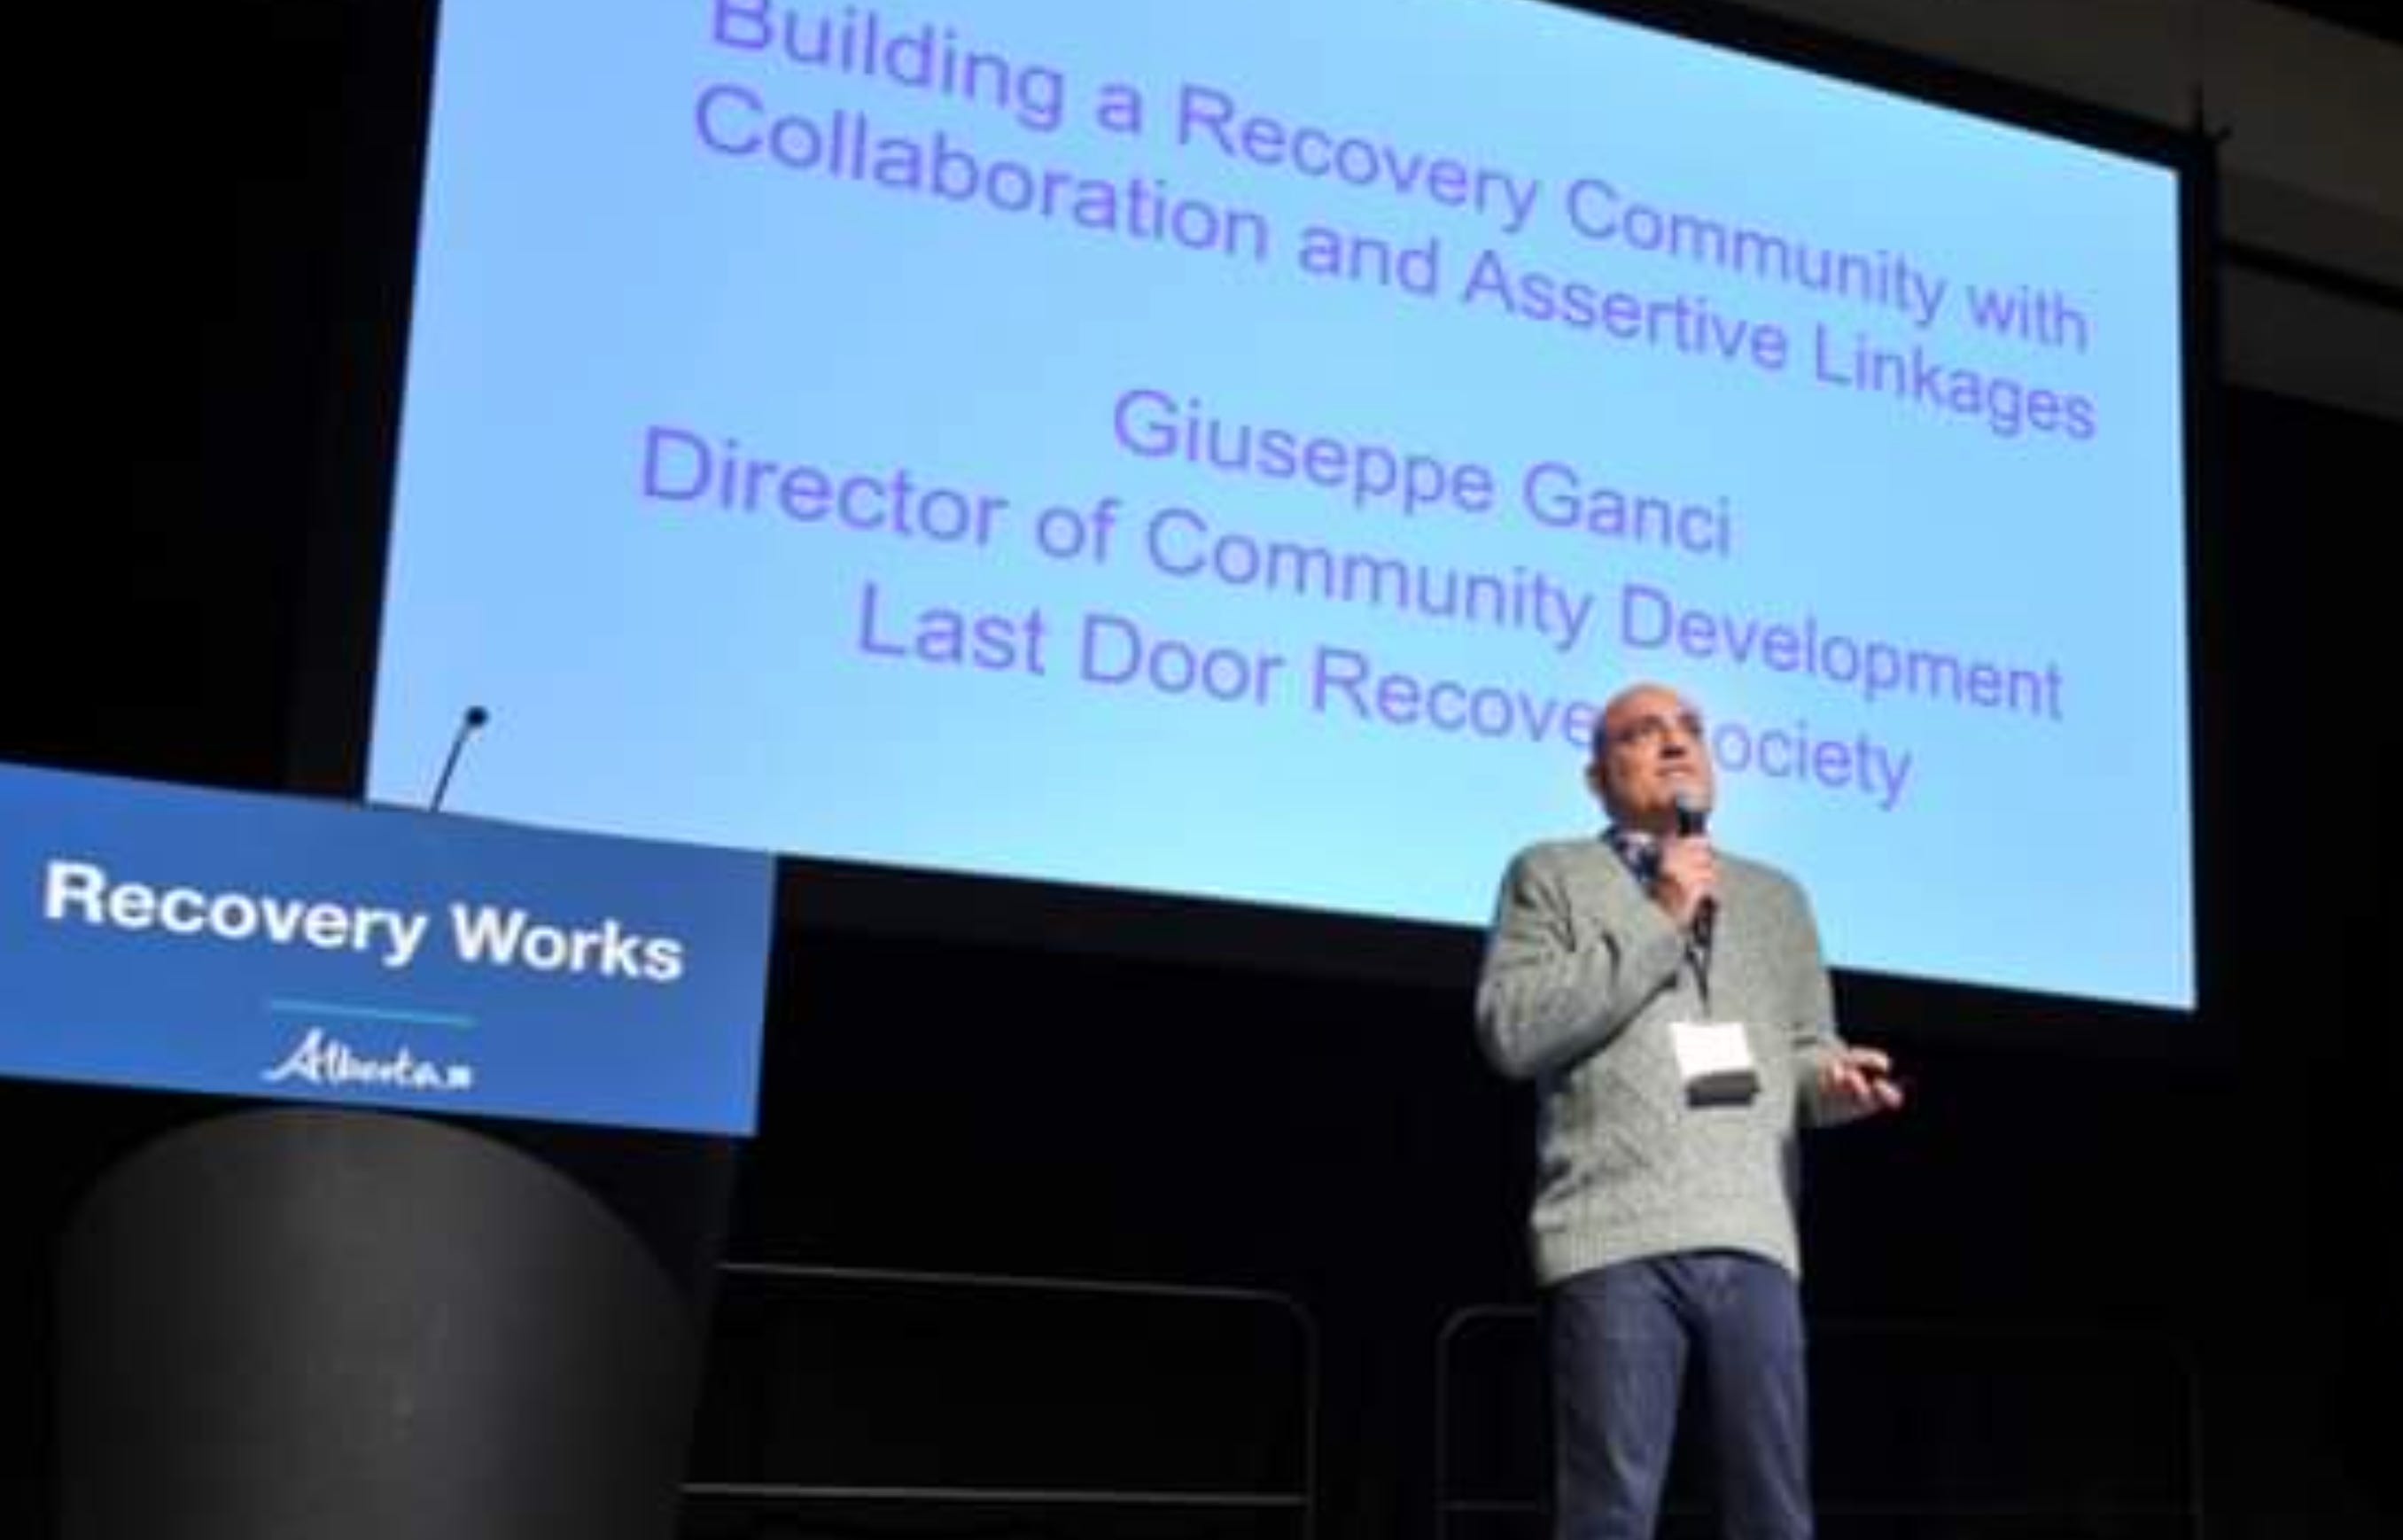 Guiseppe Ganci stands on a stage with a presentation title slide behind him, which reads building a recovery community with collaboration and assertive linkages, beside a podium that reads recovery works